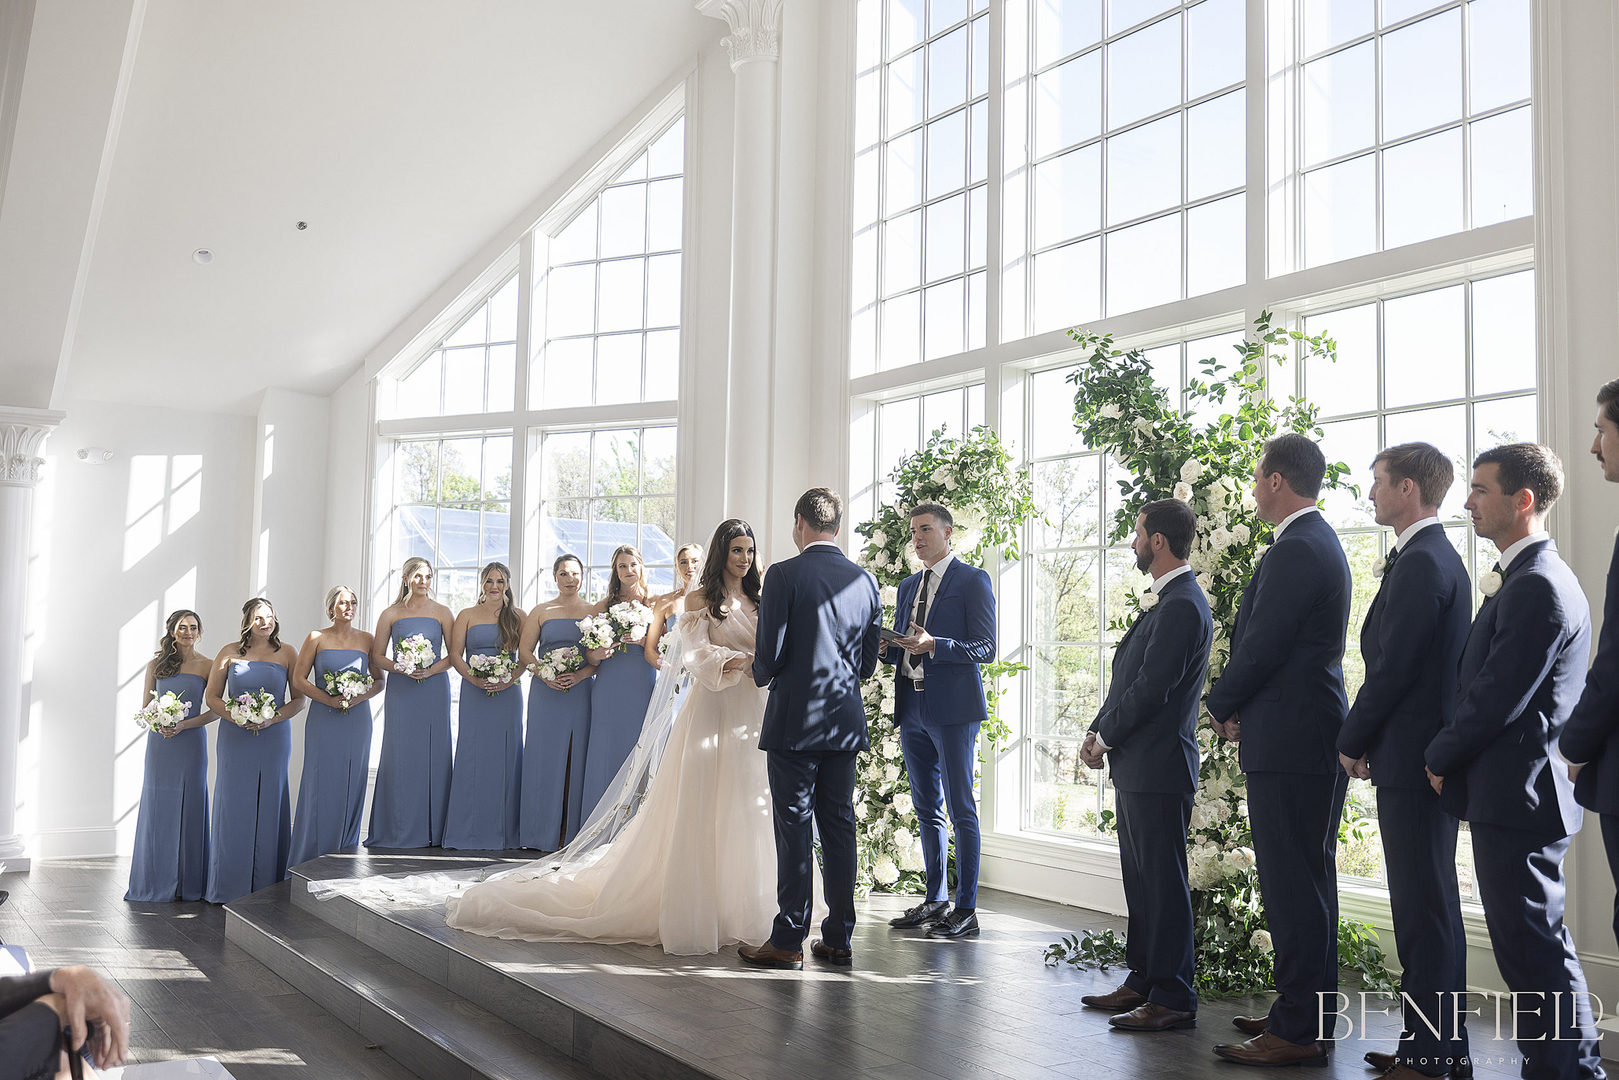 Hillside Estate Wedding Ceremony in the all white chapel with lots of natural light